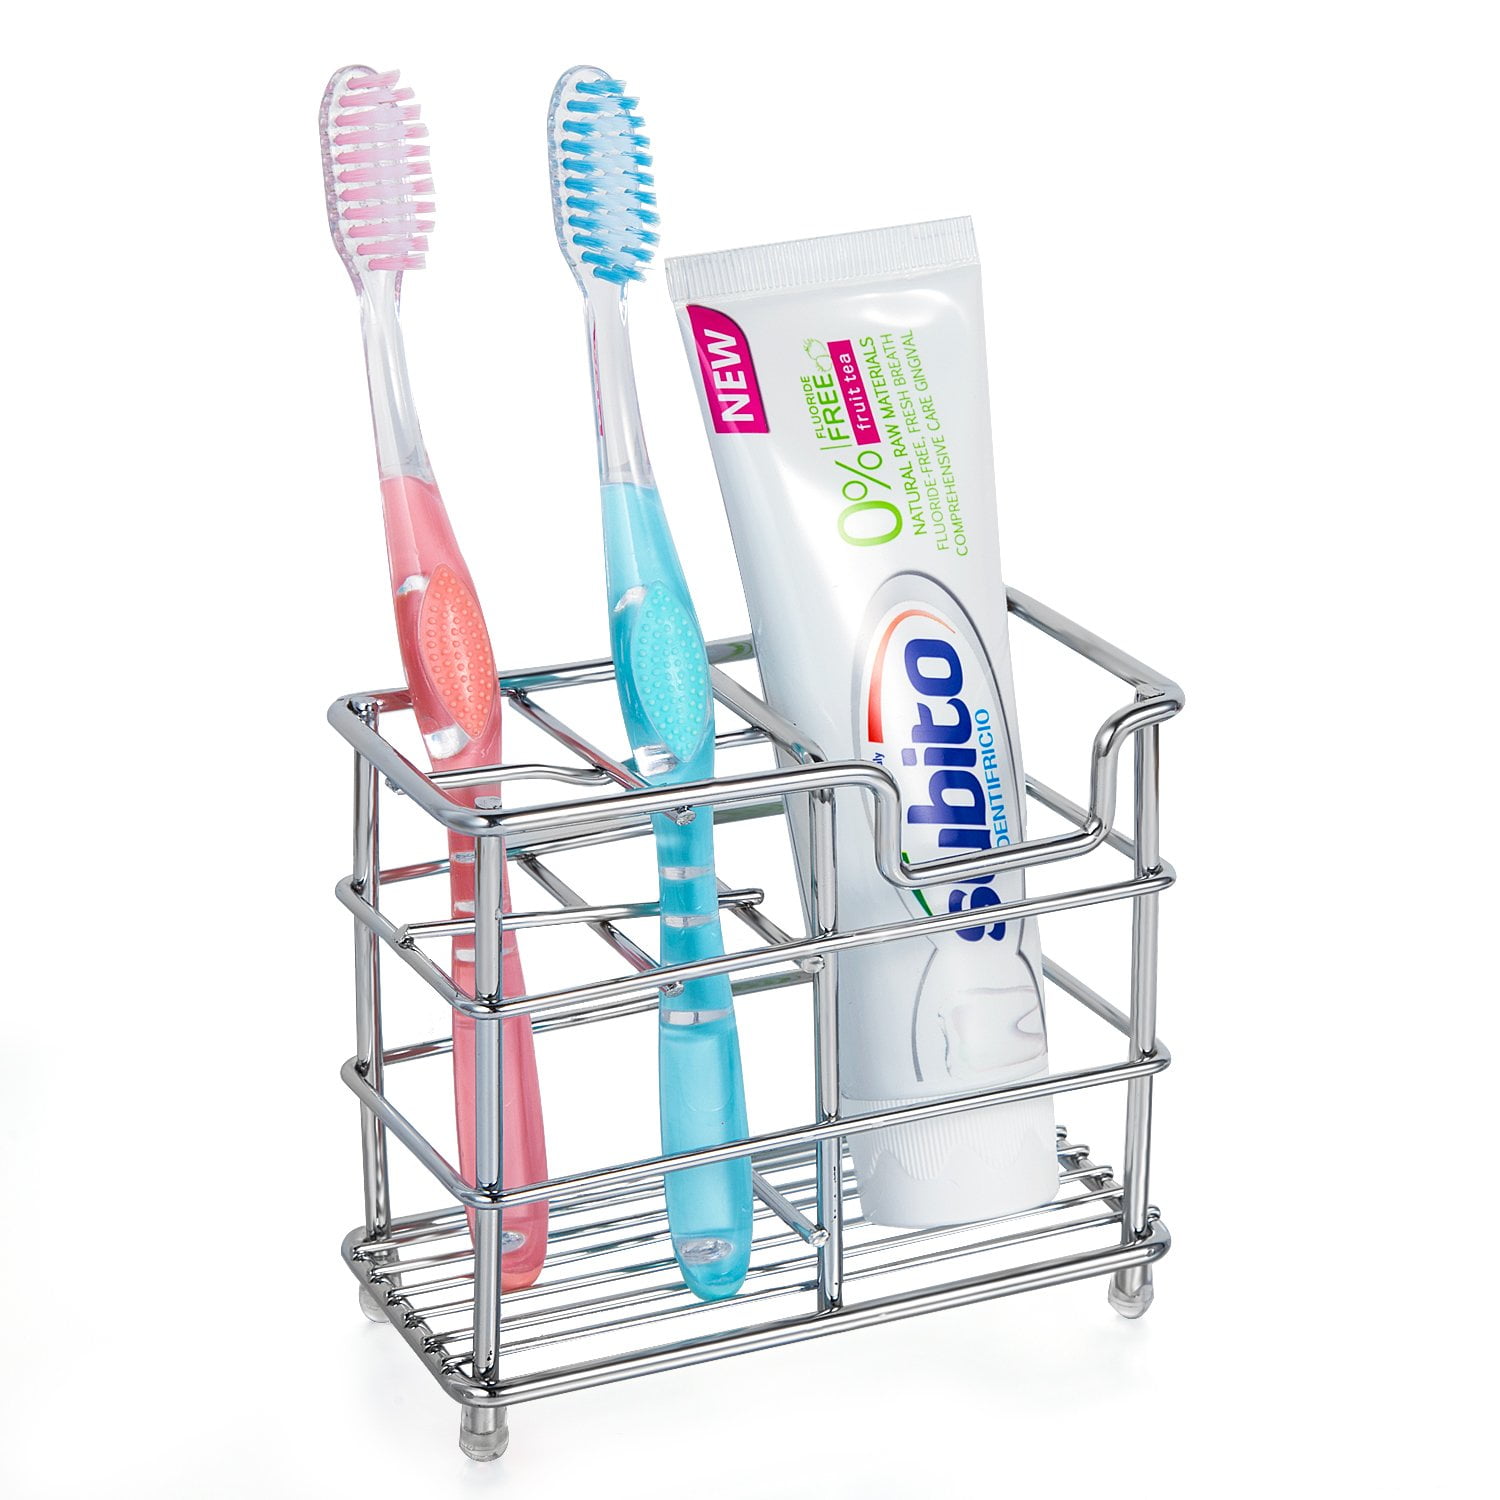 Toothbrush Cup Suction Stand Rack Holder Bathroom Stainless Steel Multi-function 